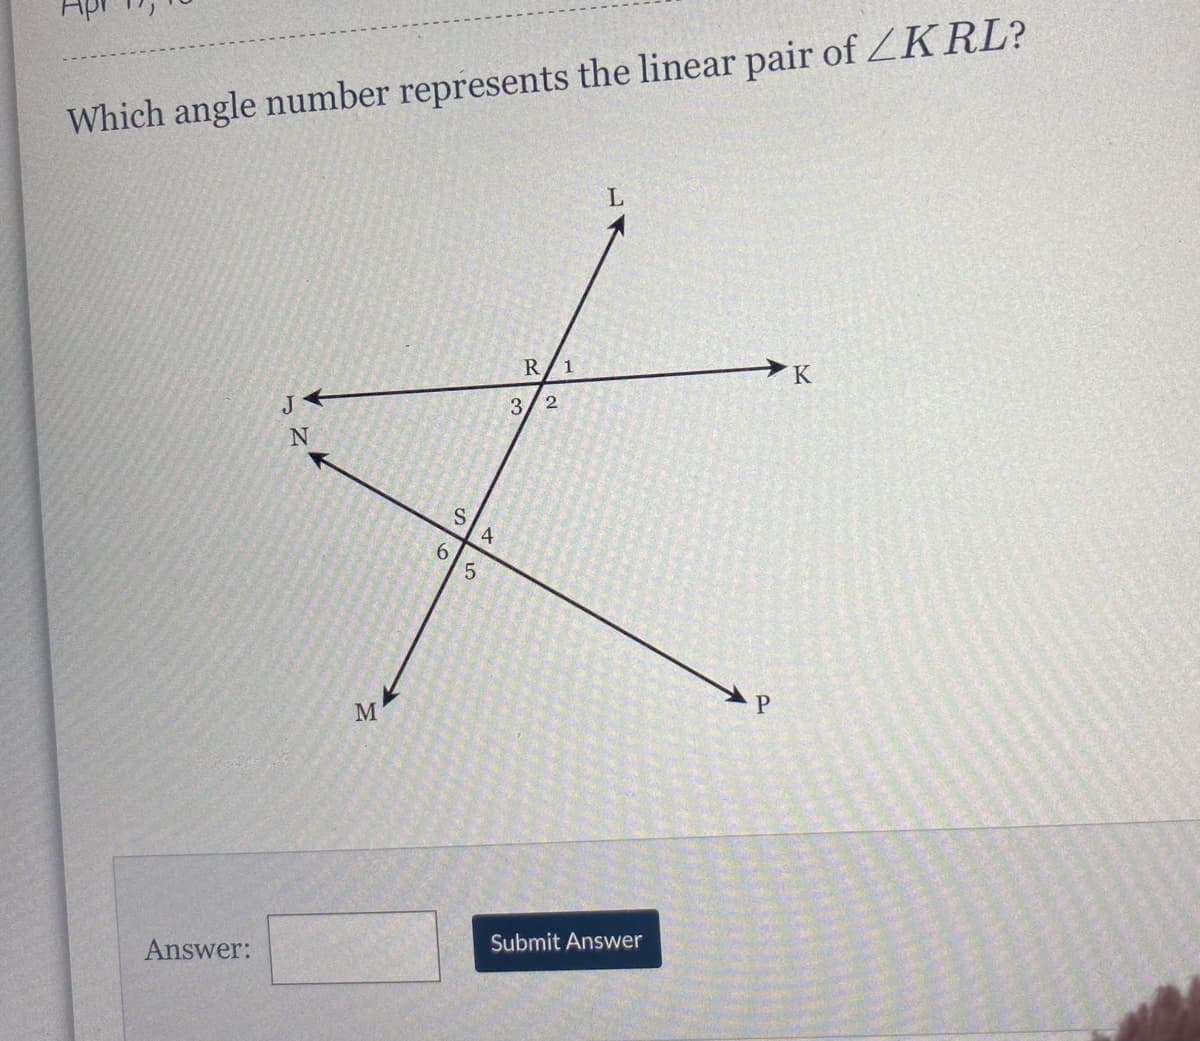 Which angle number represents the linear pair of ZK RL?
R/1
K
J
3/2
9.
M
Submit Answer
Answer:
